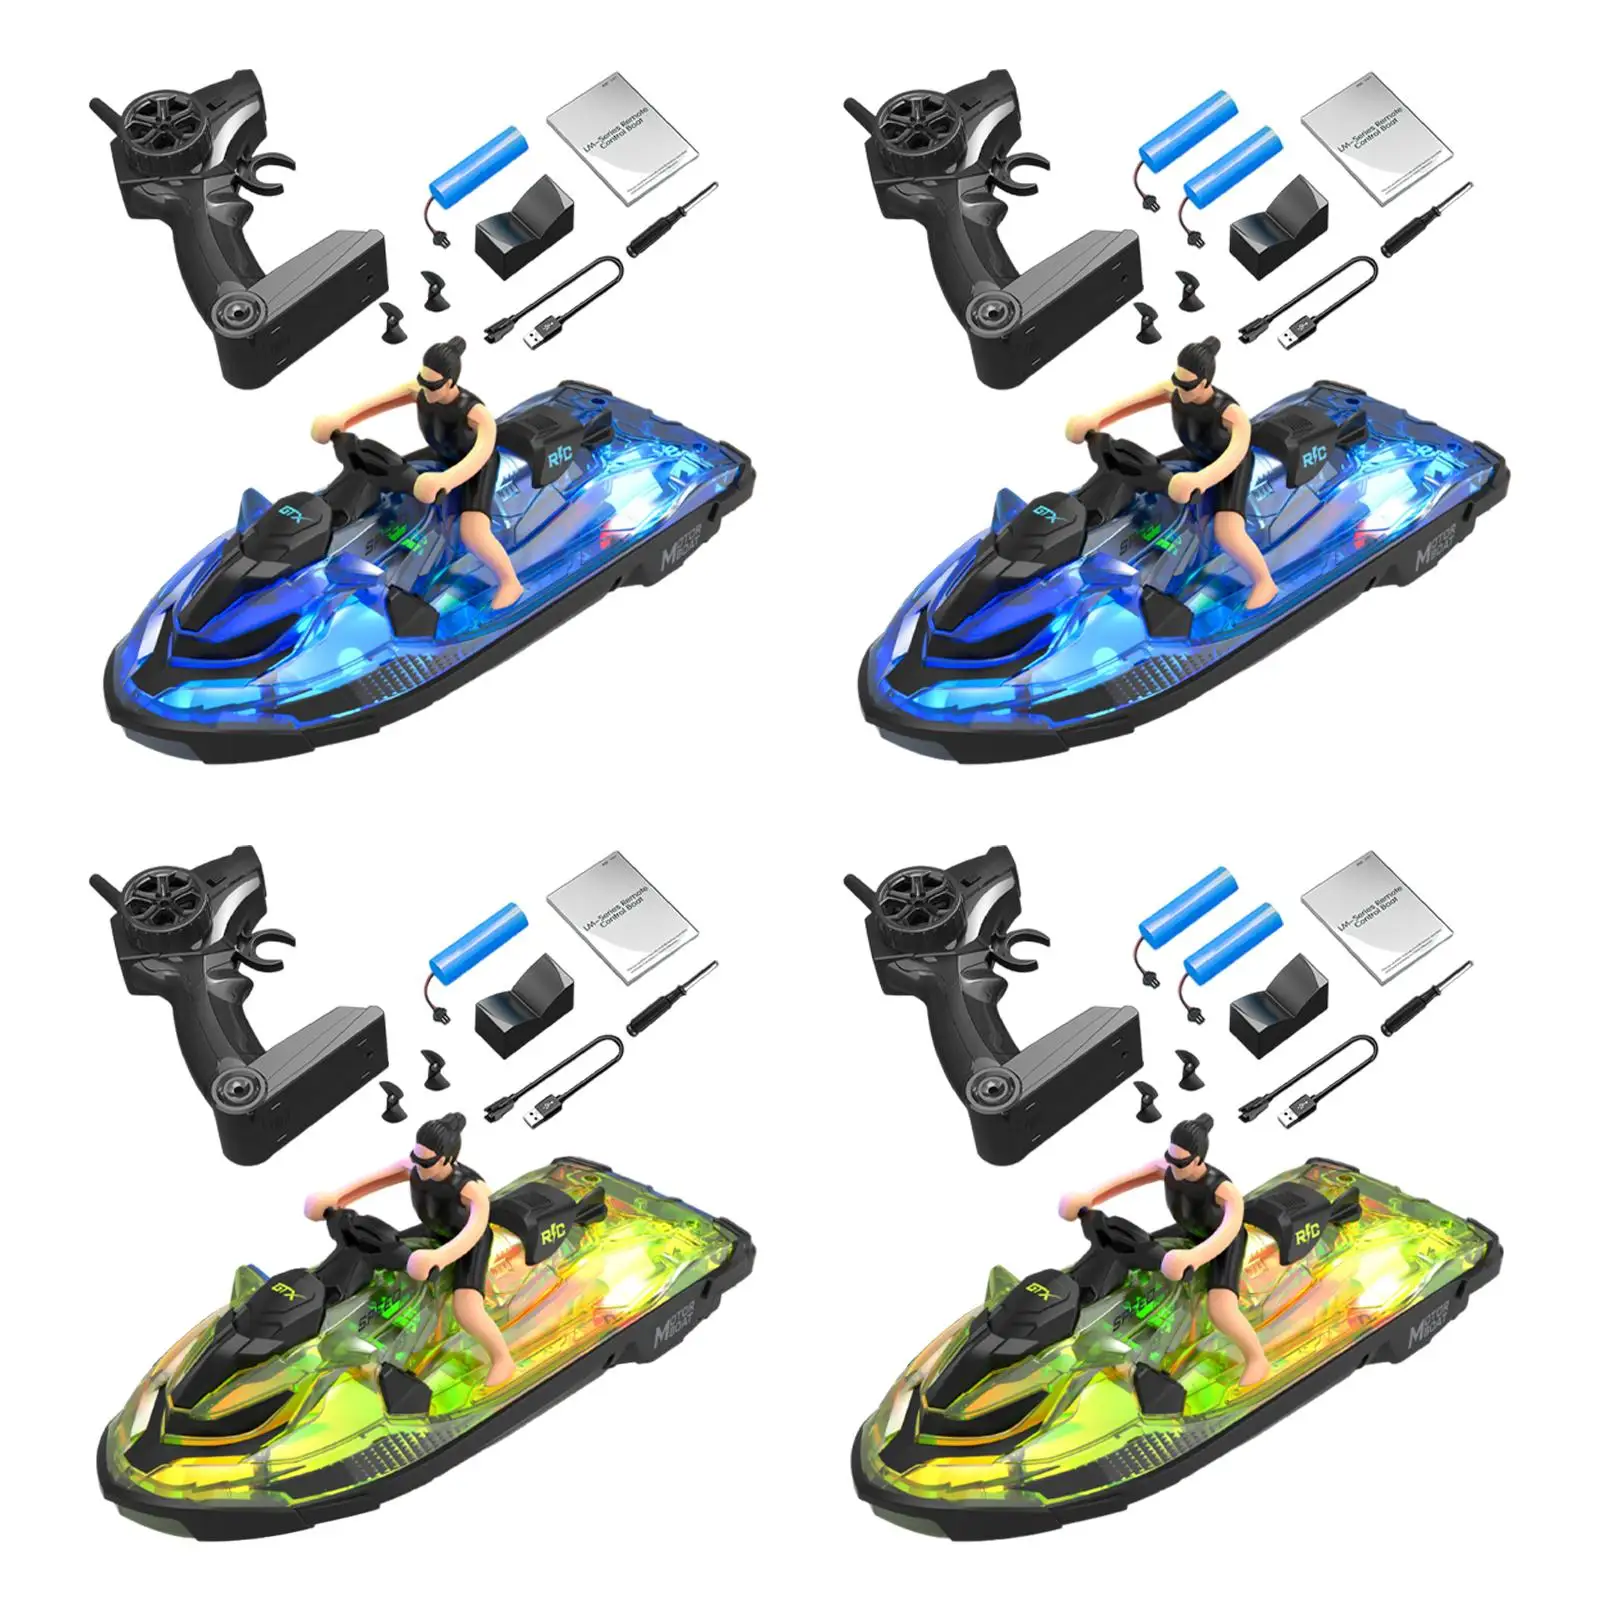 RC Speed Boat with Light Pools and Lakes Swimming Pool Water Toy 2 Gears Speed Adjustment High Speed RC Boat for Kids Boys Gifts